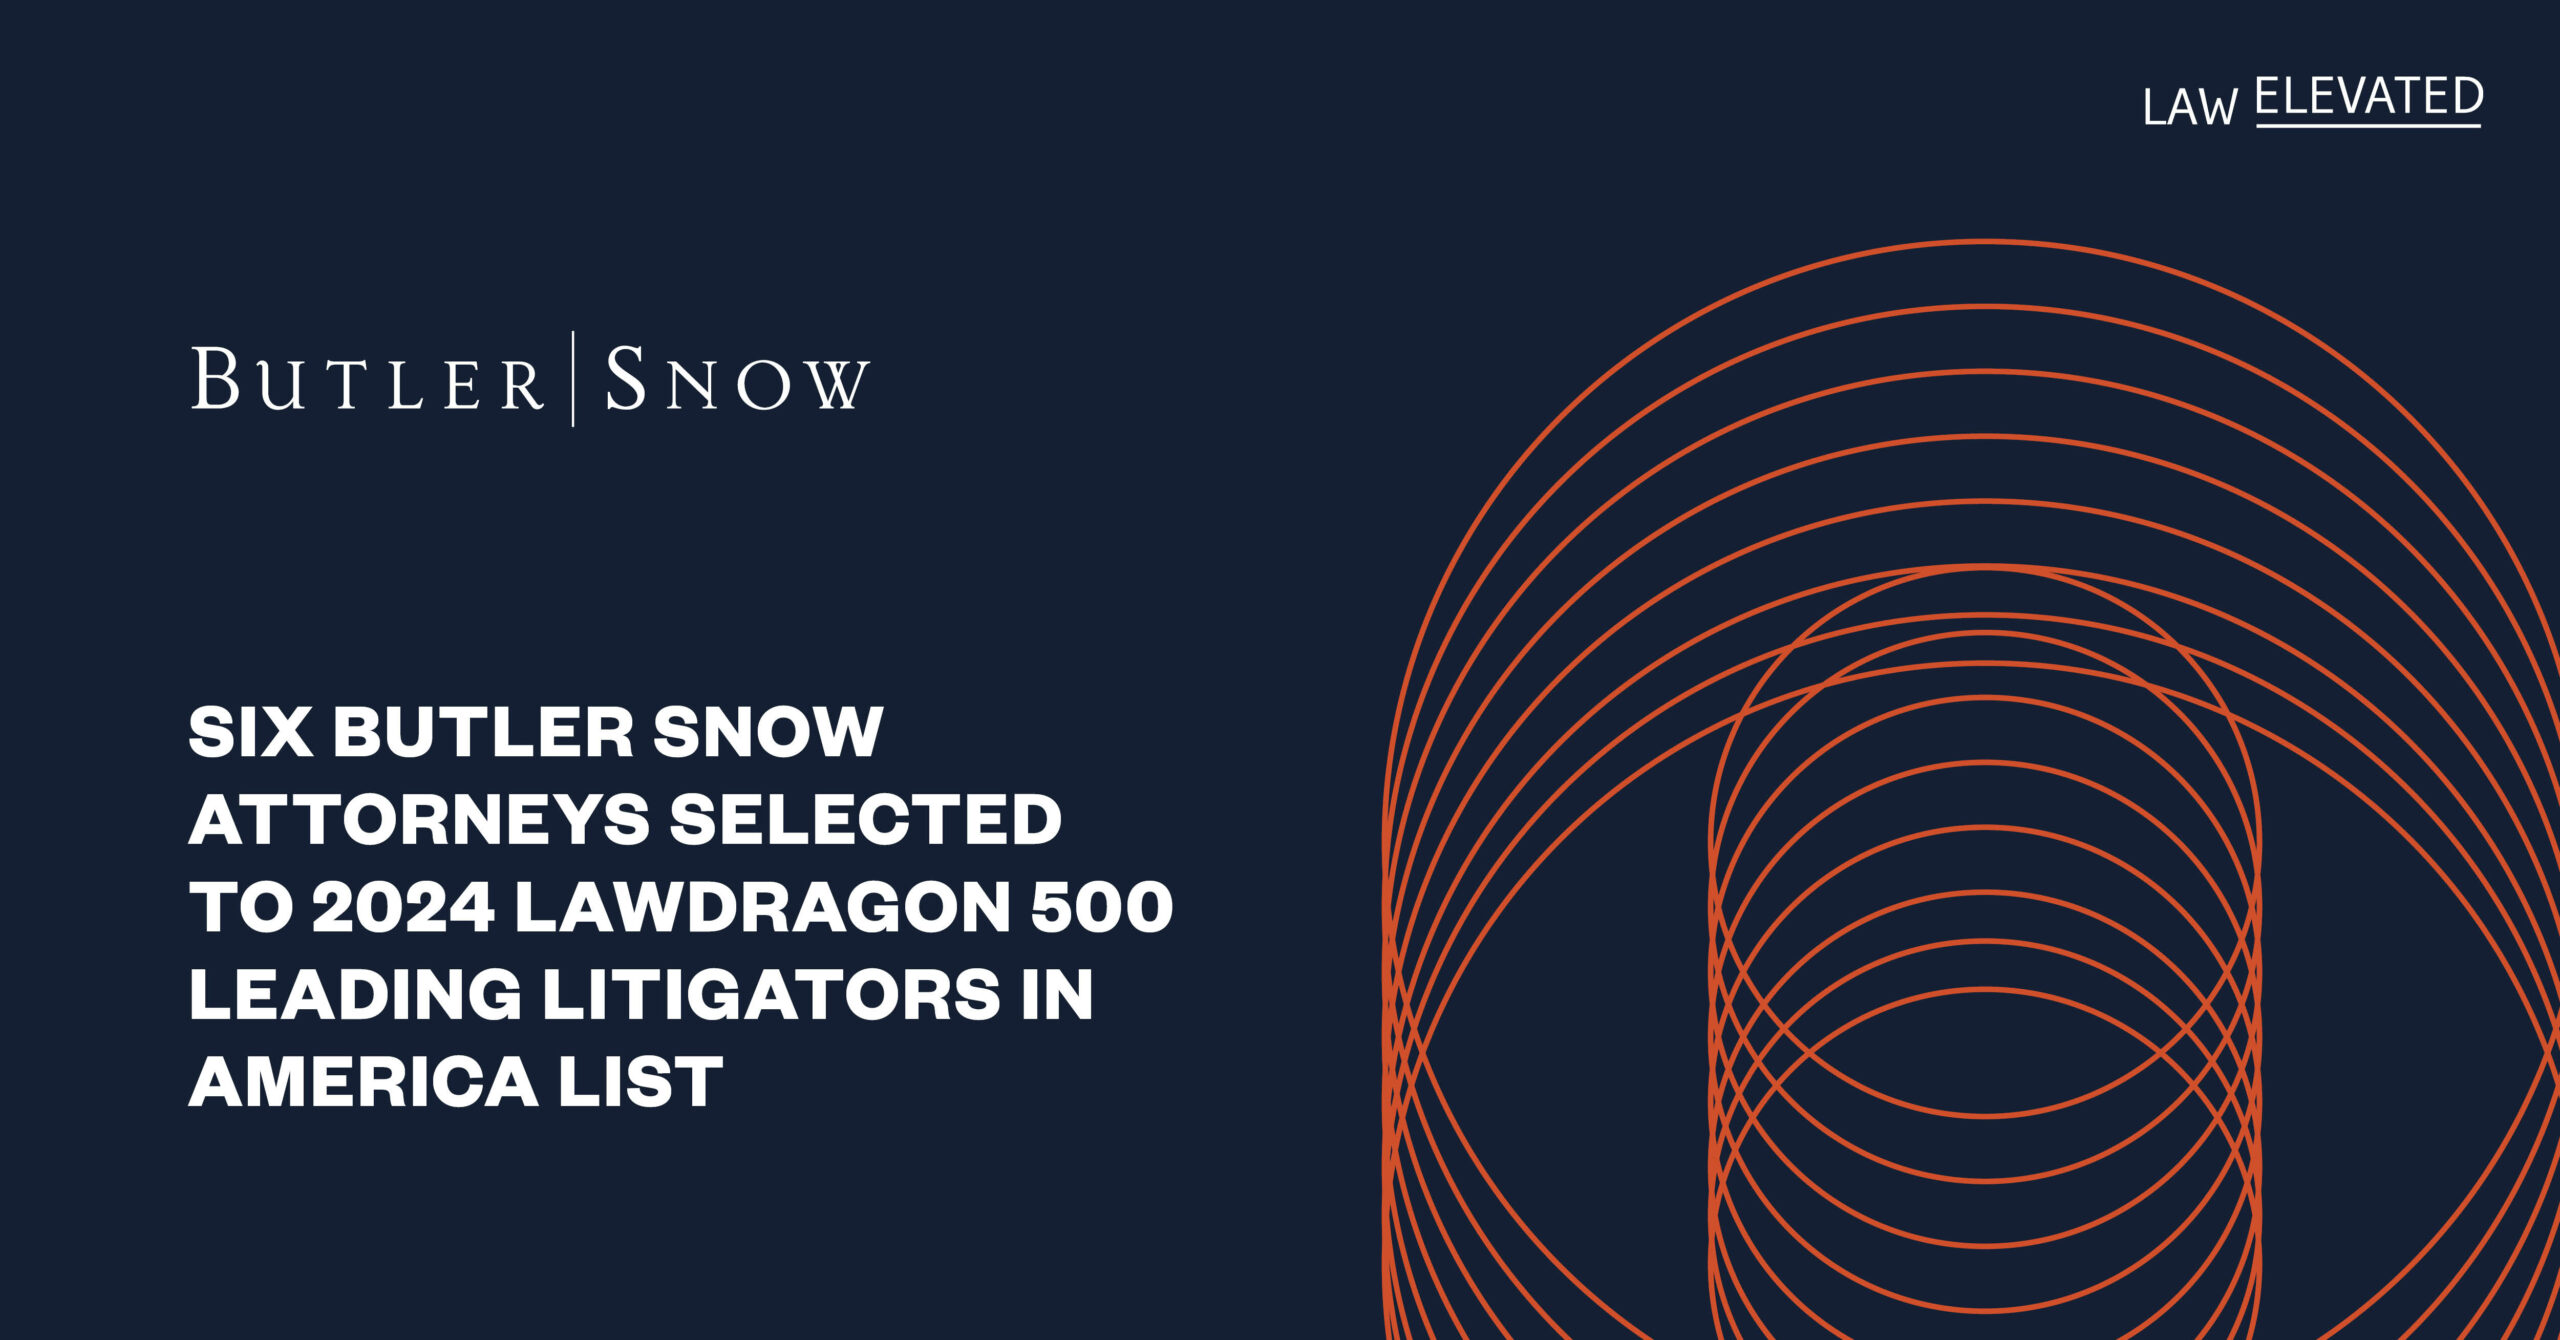 Six Butler Snow Attorneys Selected To 2024 Lawdragon 500 Leading Litigators in America List